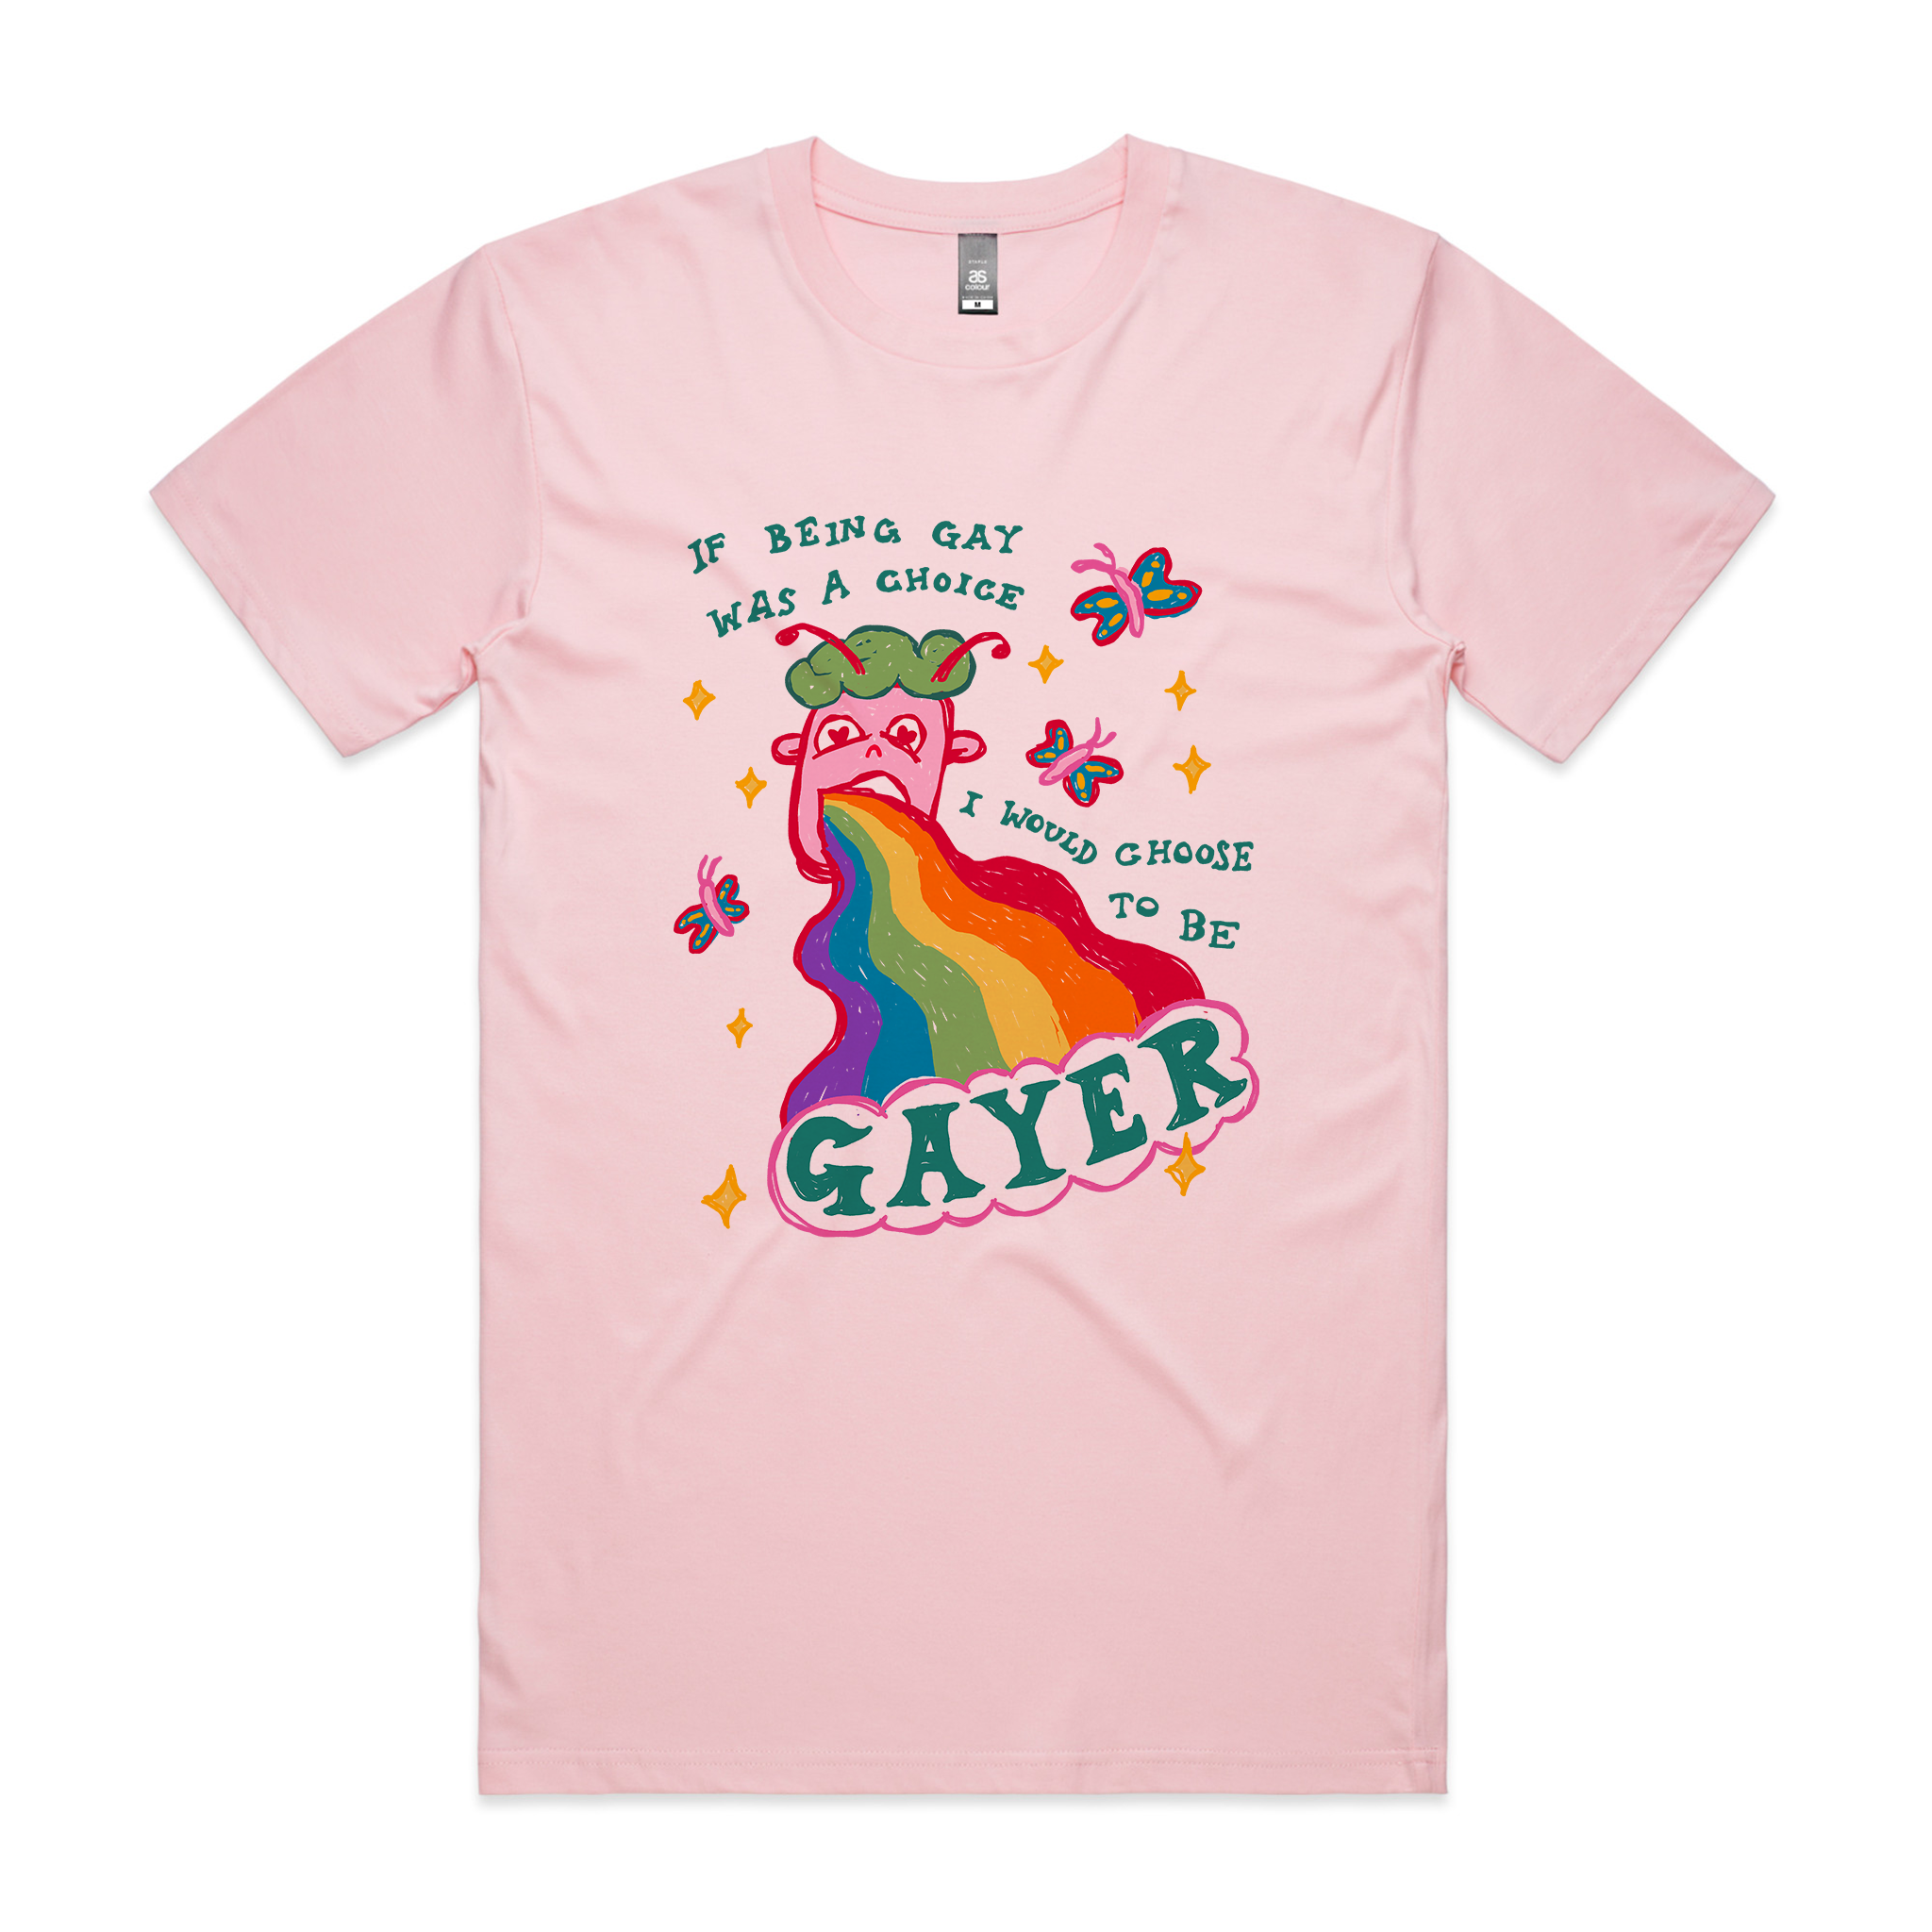 Choose To Be Gayer Tee